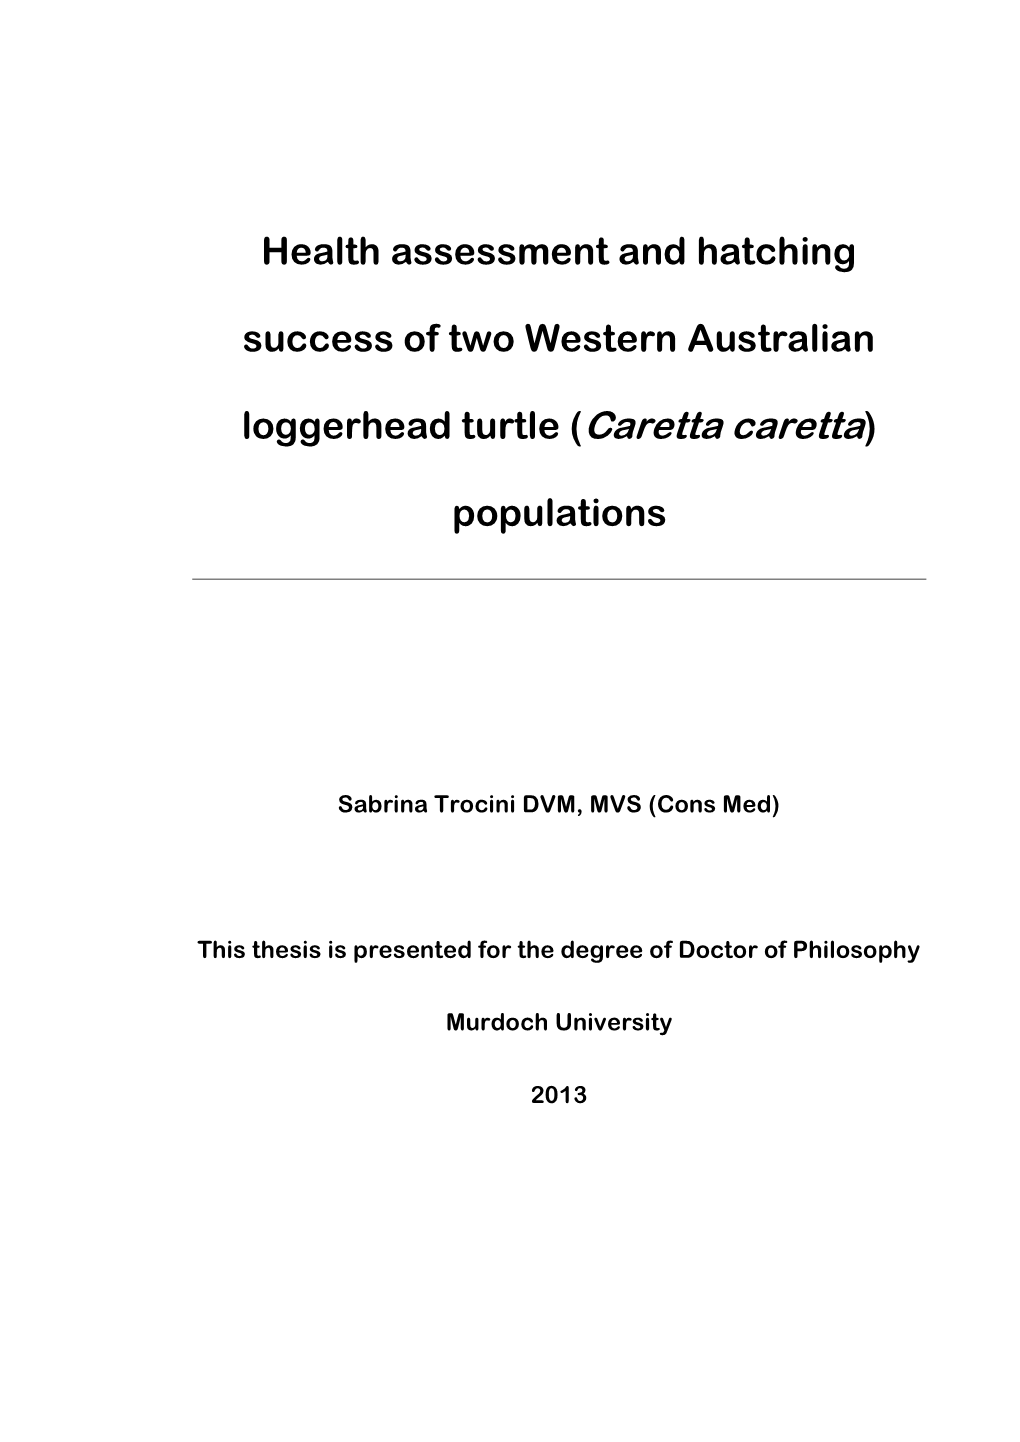 Health Assessment and Hatching Success of Two Western Australian Loggerhead Turtle